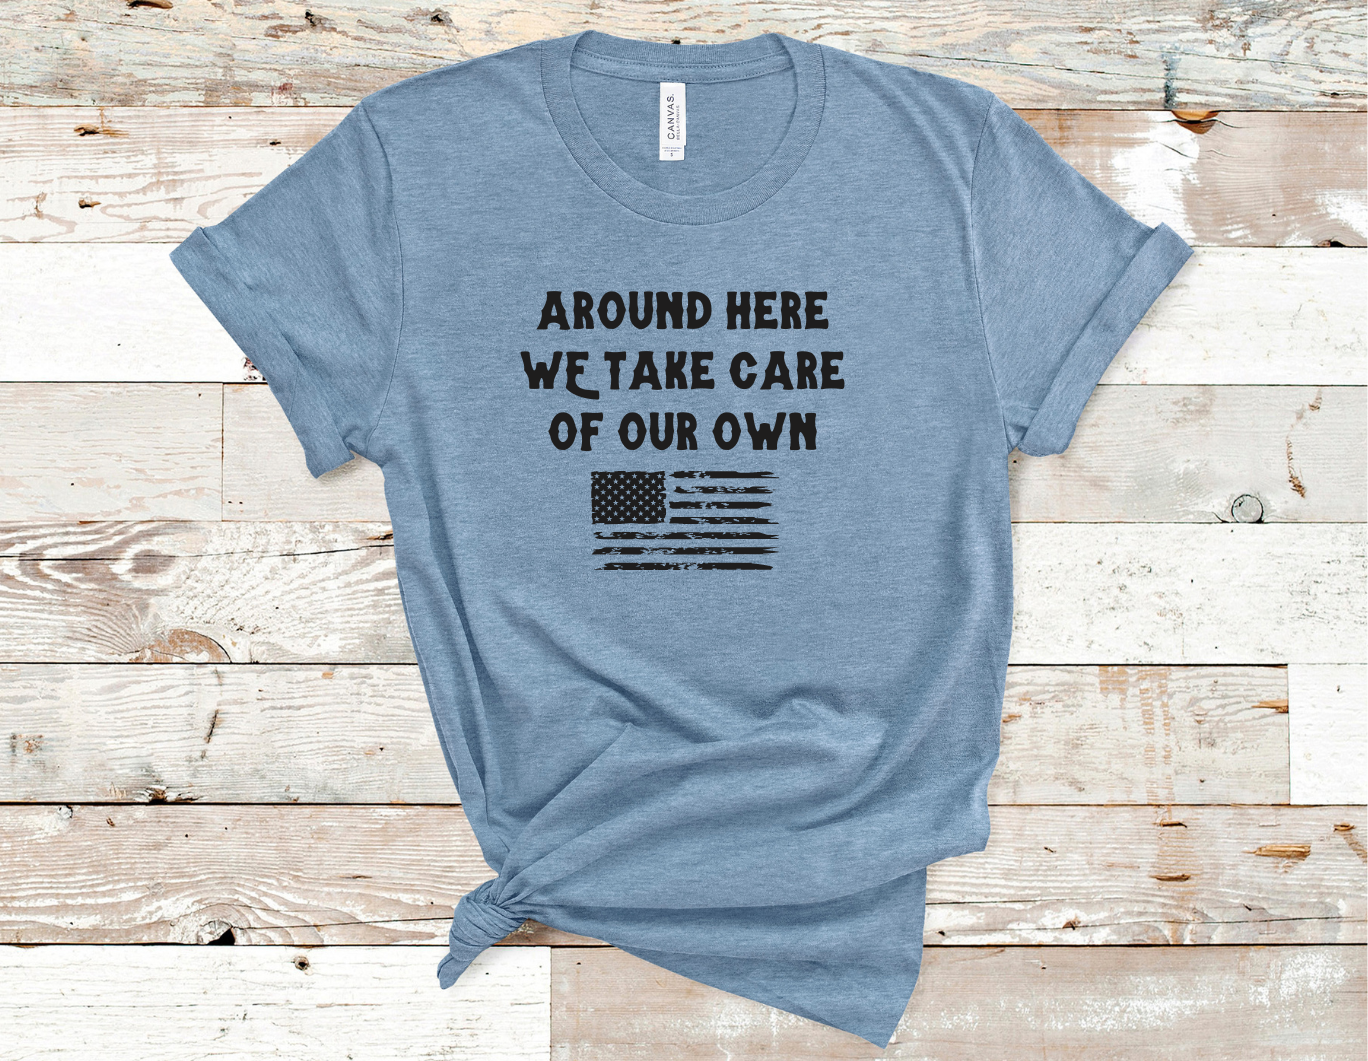 Take Care of our Own- Jason Aldean Tee